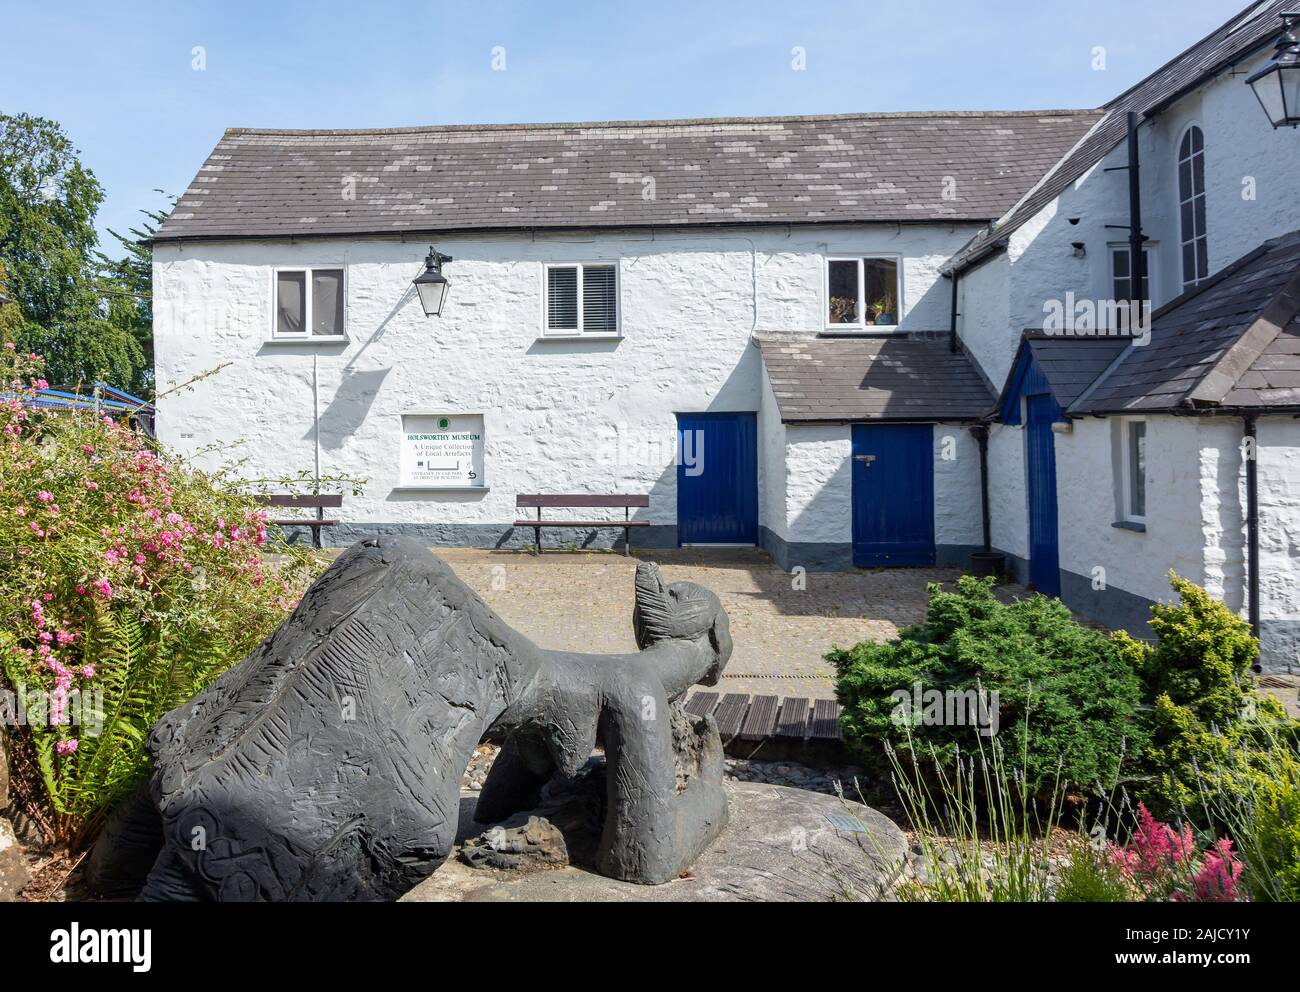 Musée Holsworthy, North Road, Holsworthy, Devon, Angleterre, Royaume-Uni Banque D'Images